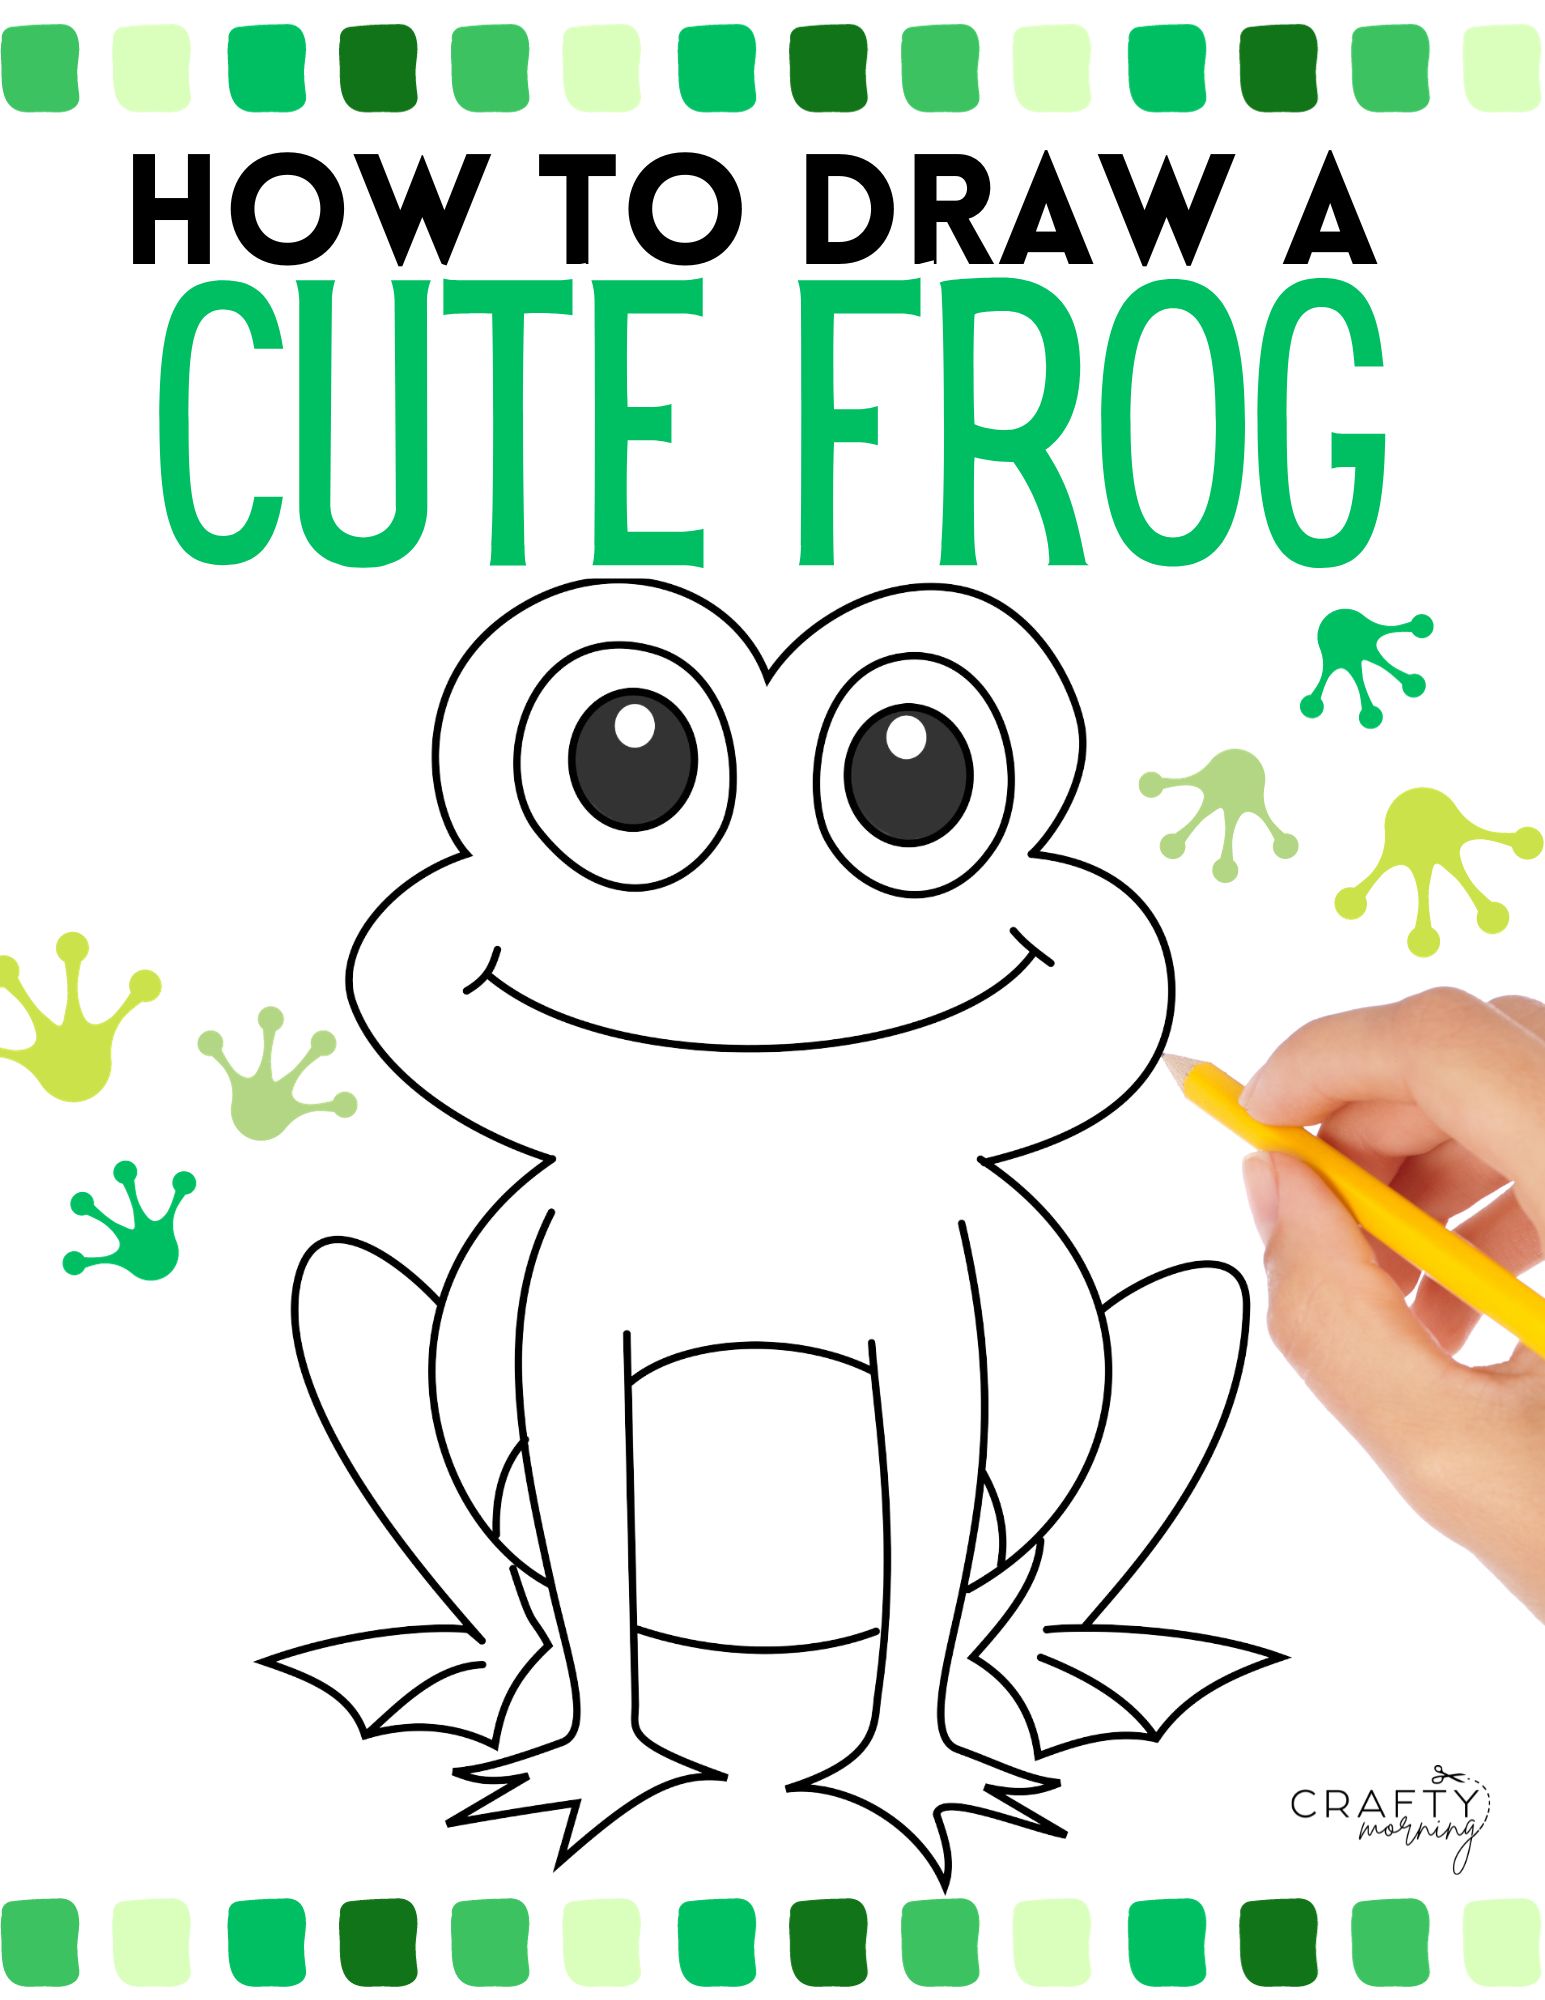 How To Draw a Frog - EASY Drawing Tutorial!-saigonsouth.com.vn